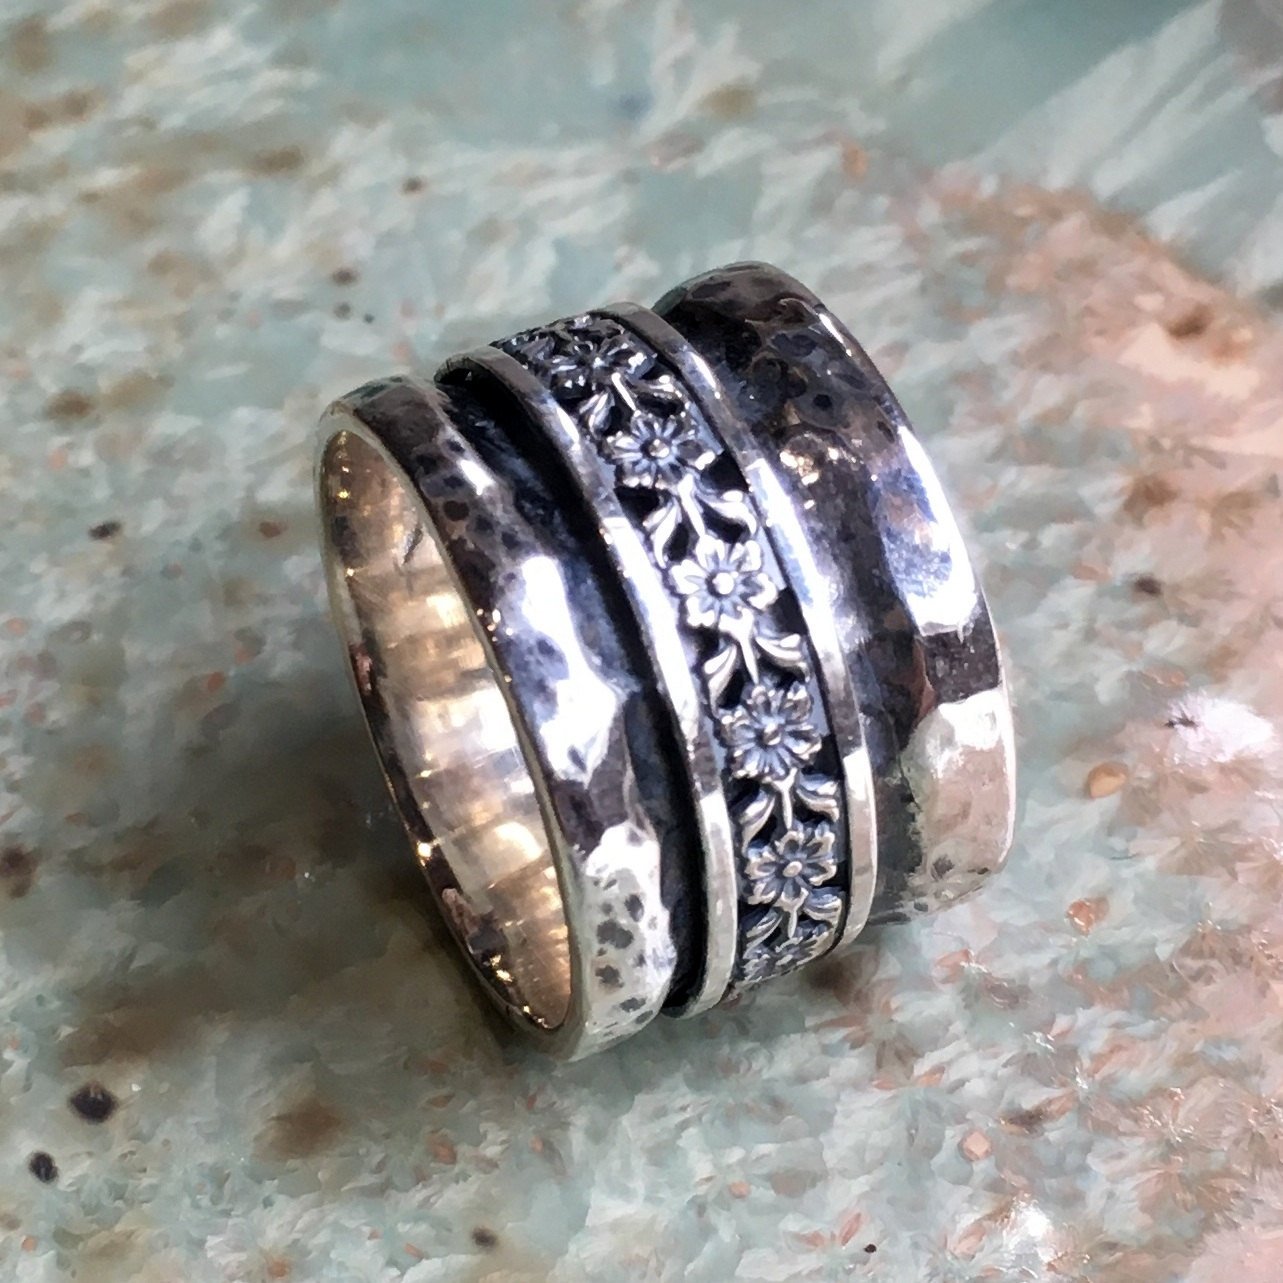 Silver floral band, rustic silver band, Wedding ring, Meditation spinner ring, thumb ring, wedding band, rustic ring - Walk on spring R2443